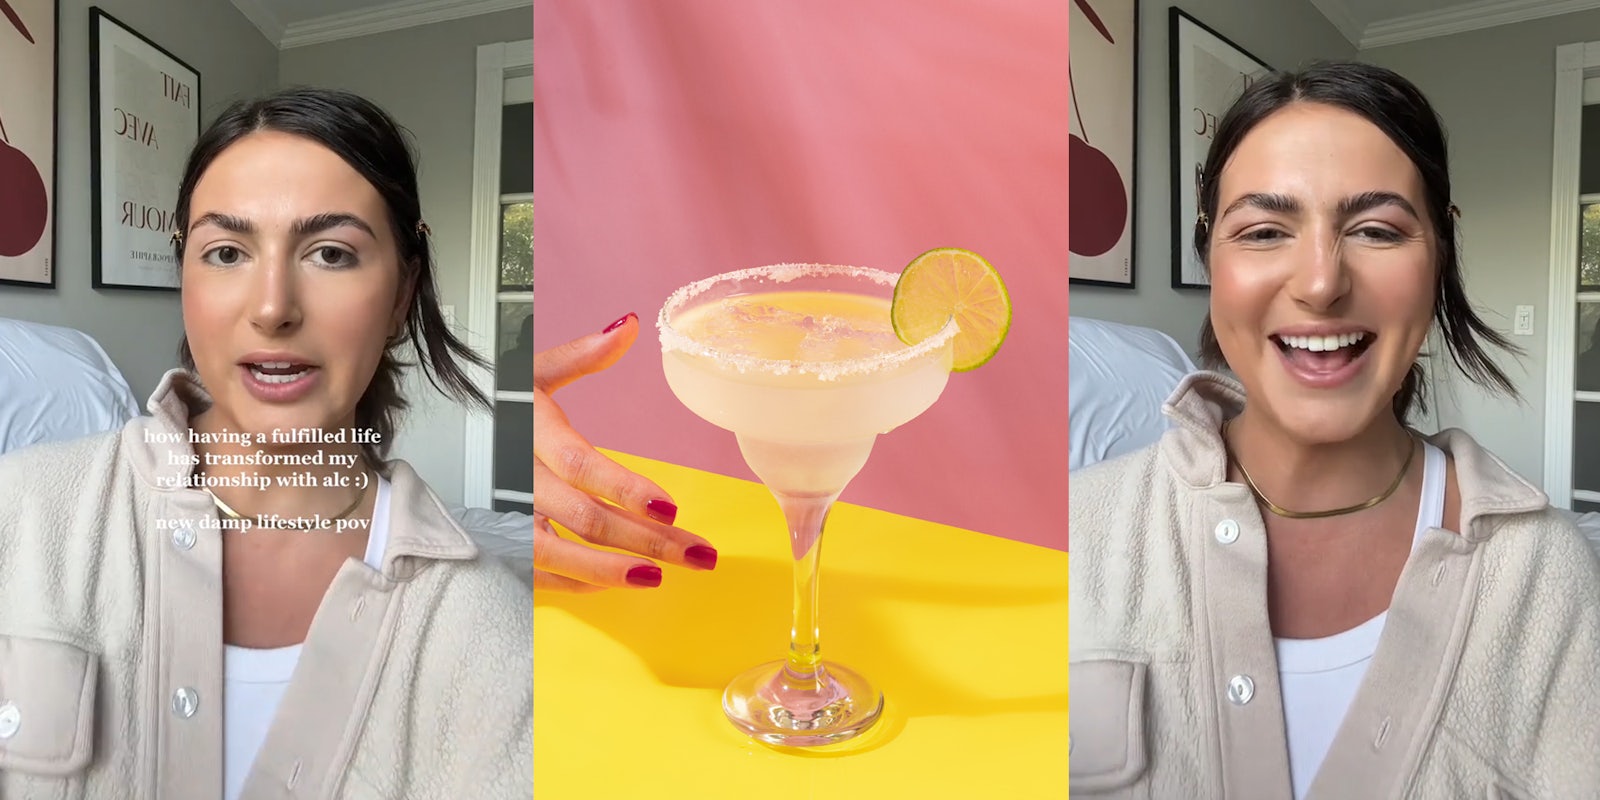 woman speaking with caption 'how having a fulfilled life has transformed my relationship with ale :) new damp lifestyle pov' (l) woman hand reaching for margarita in front of pink wall (c) woman smiling (r)